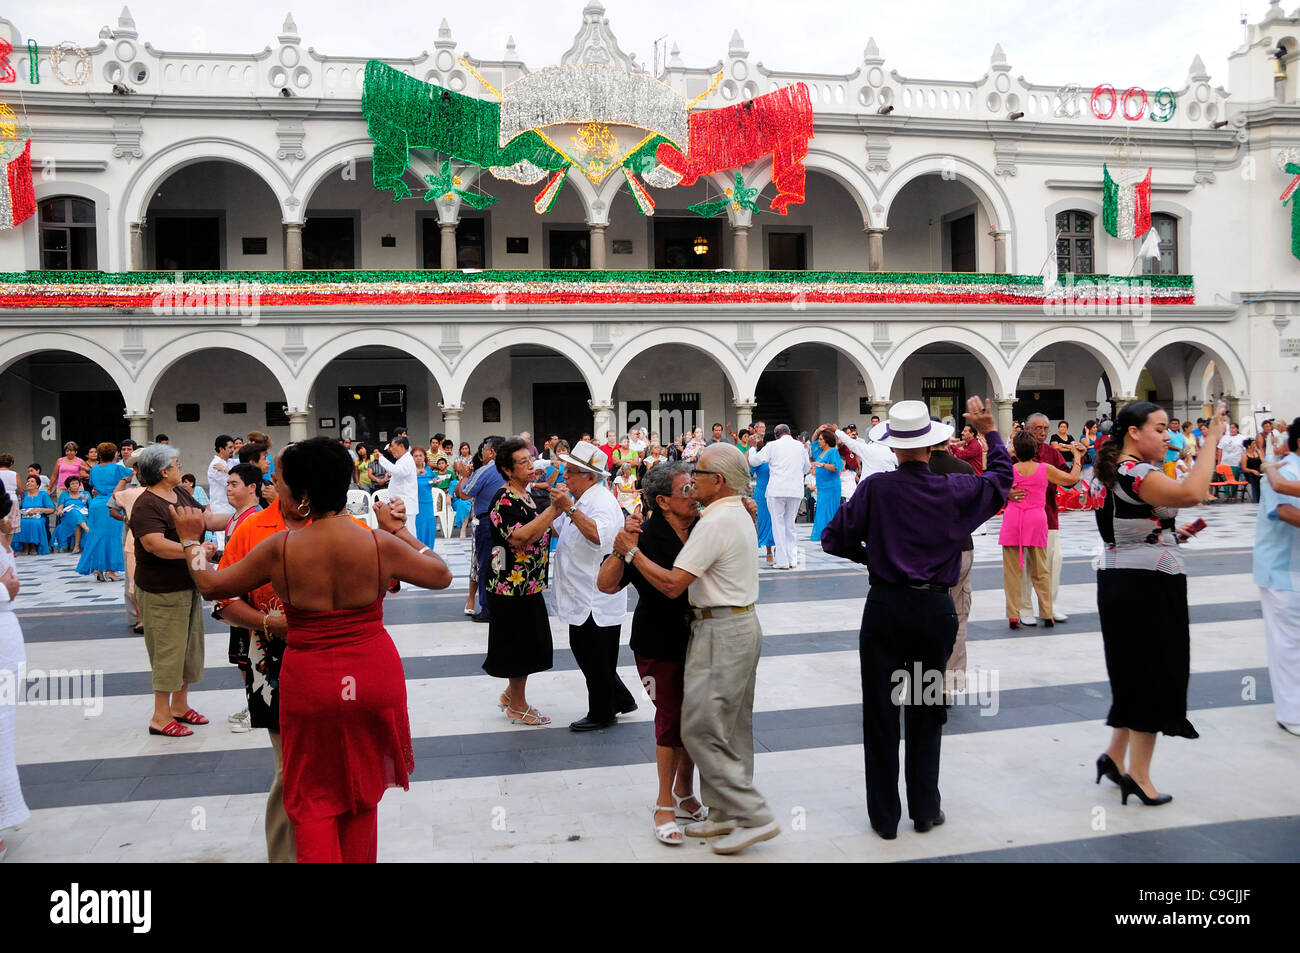 Mexico, Veracruz, Couples dancing in the Zocalo with facade of government buildings behind hung with bright decorations Stock Photo